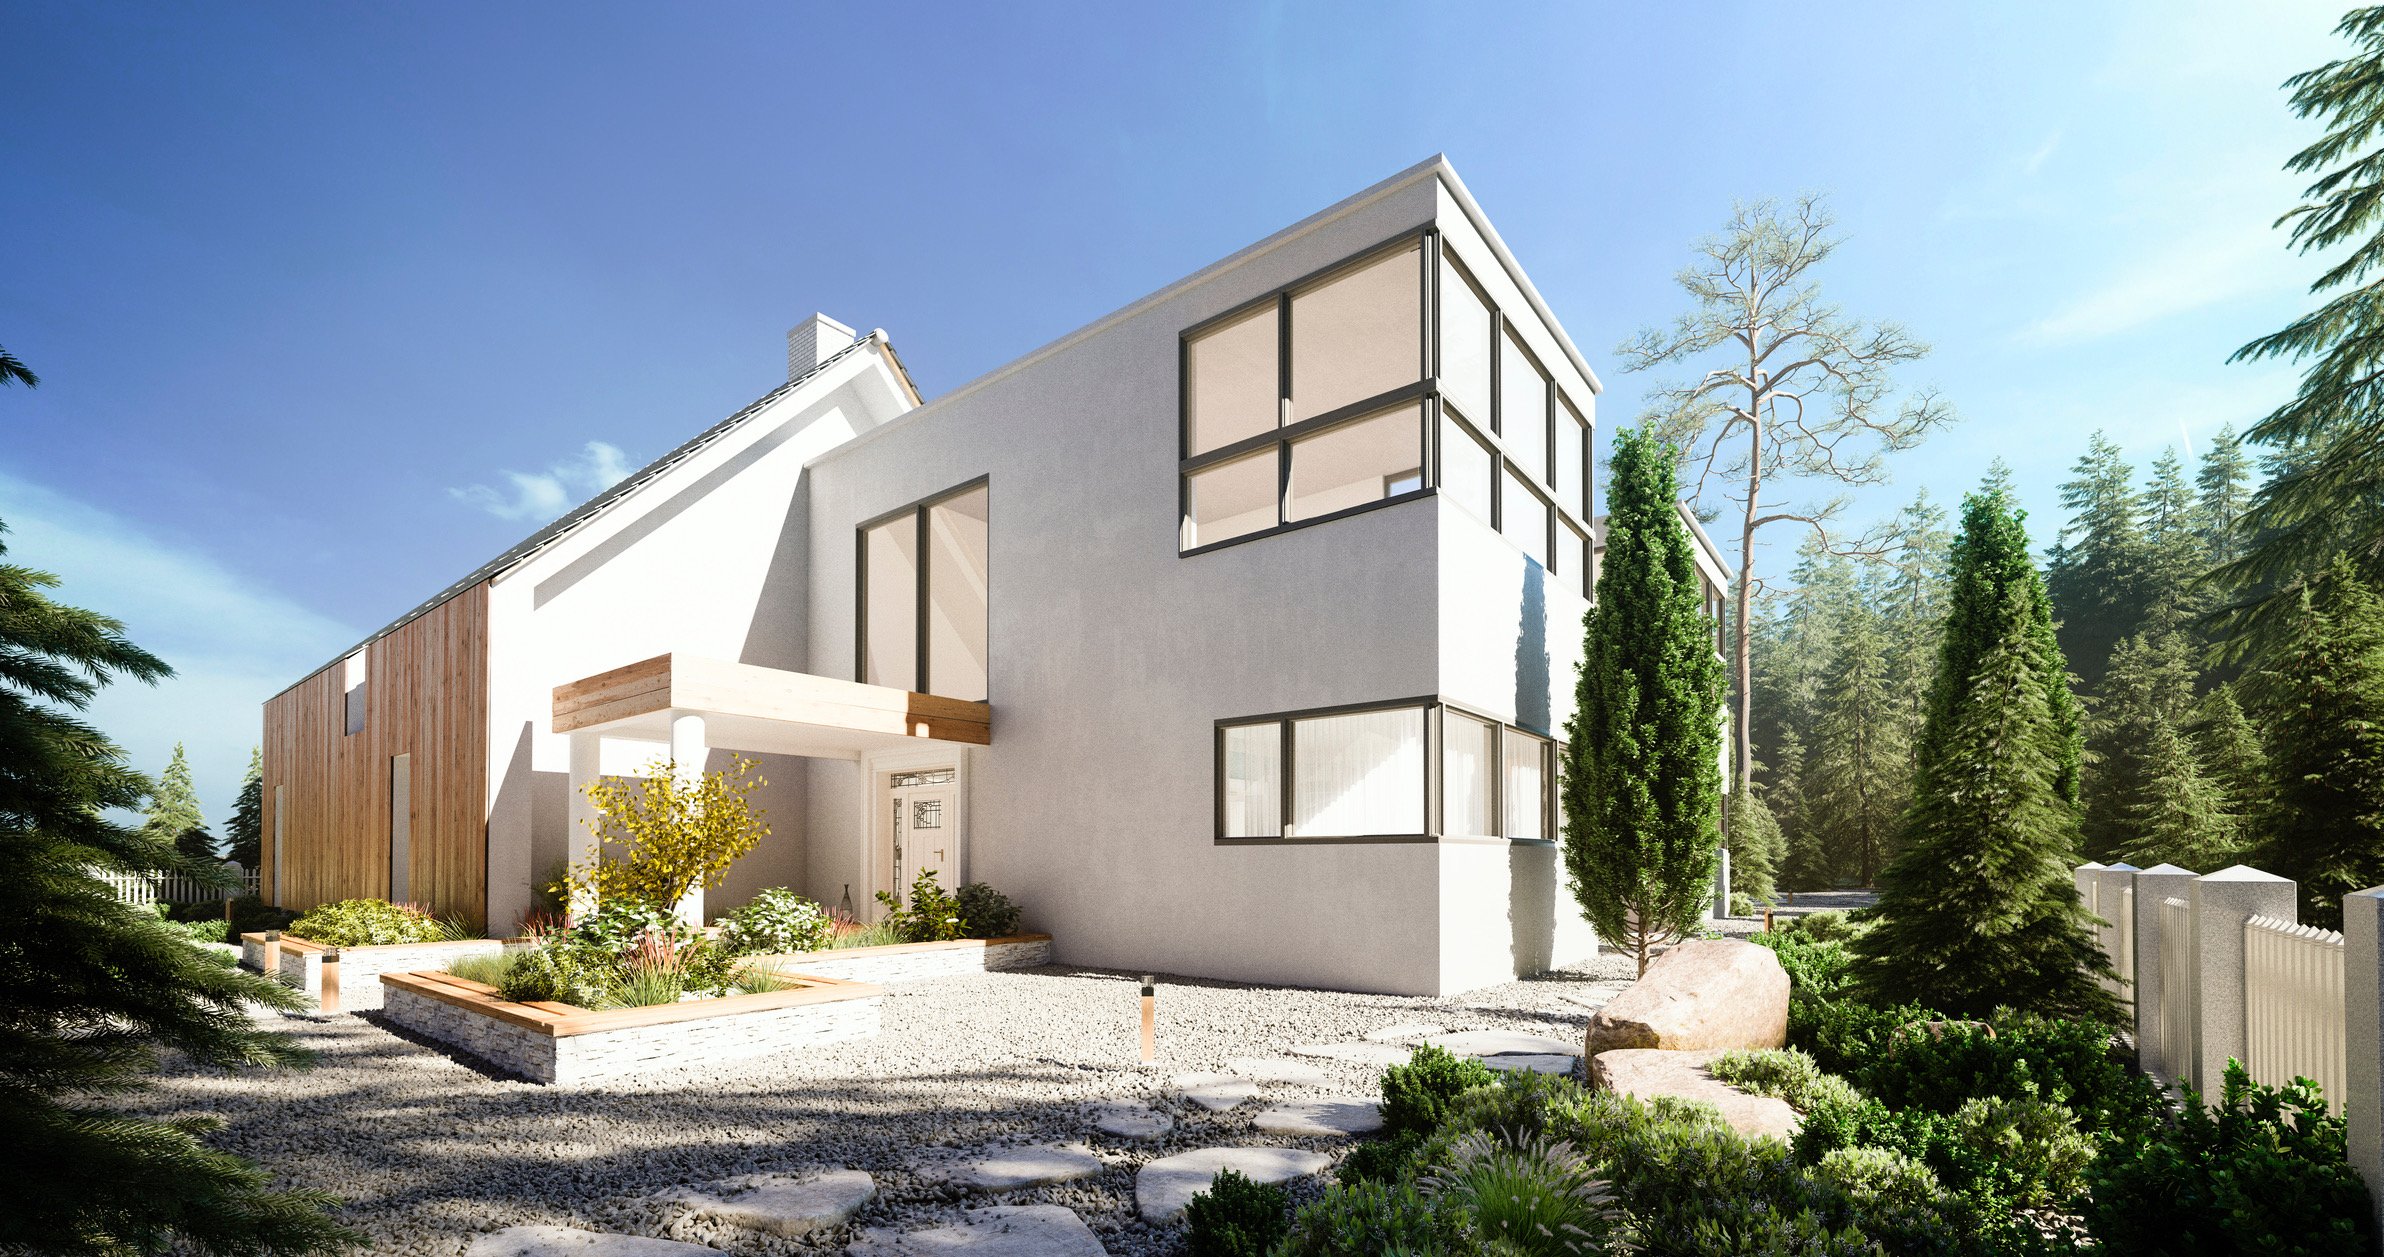 2383 Mandeville Canyon Rendering 